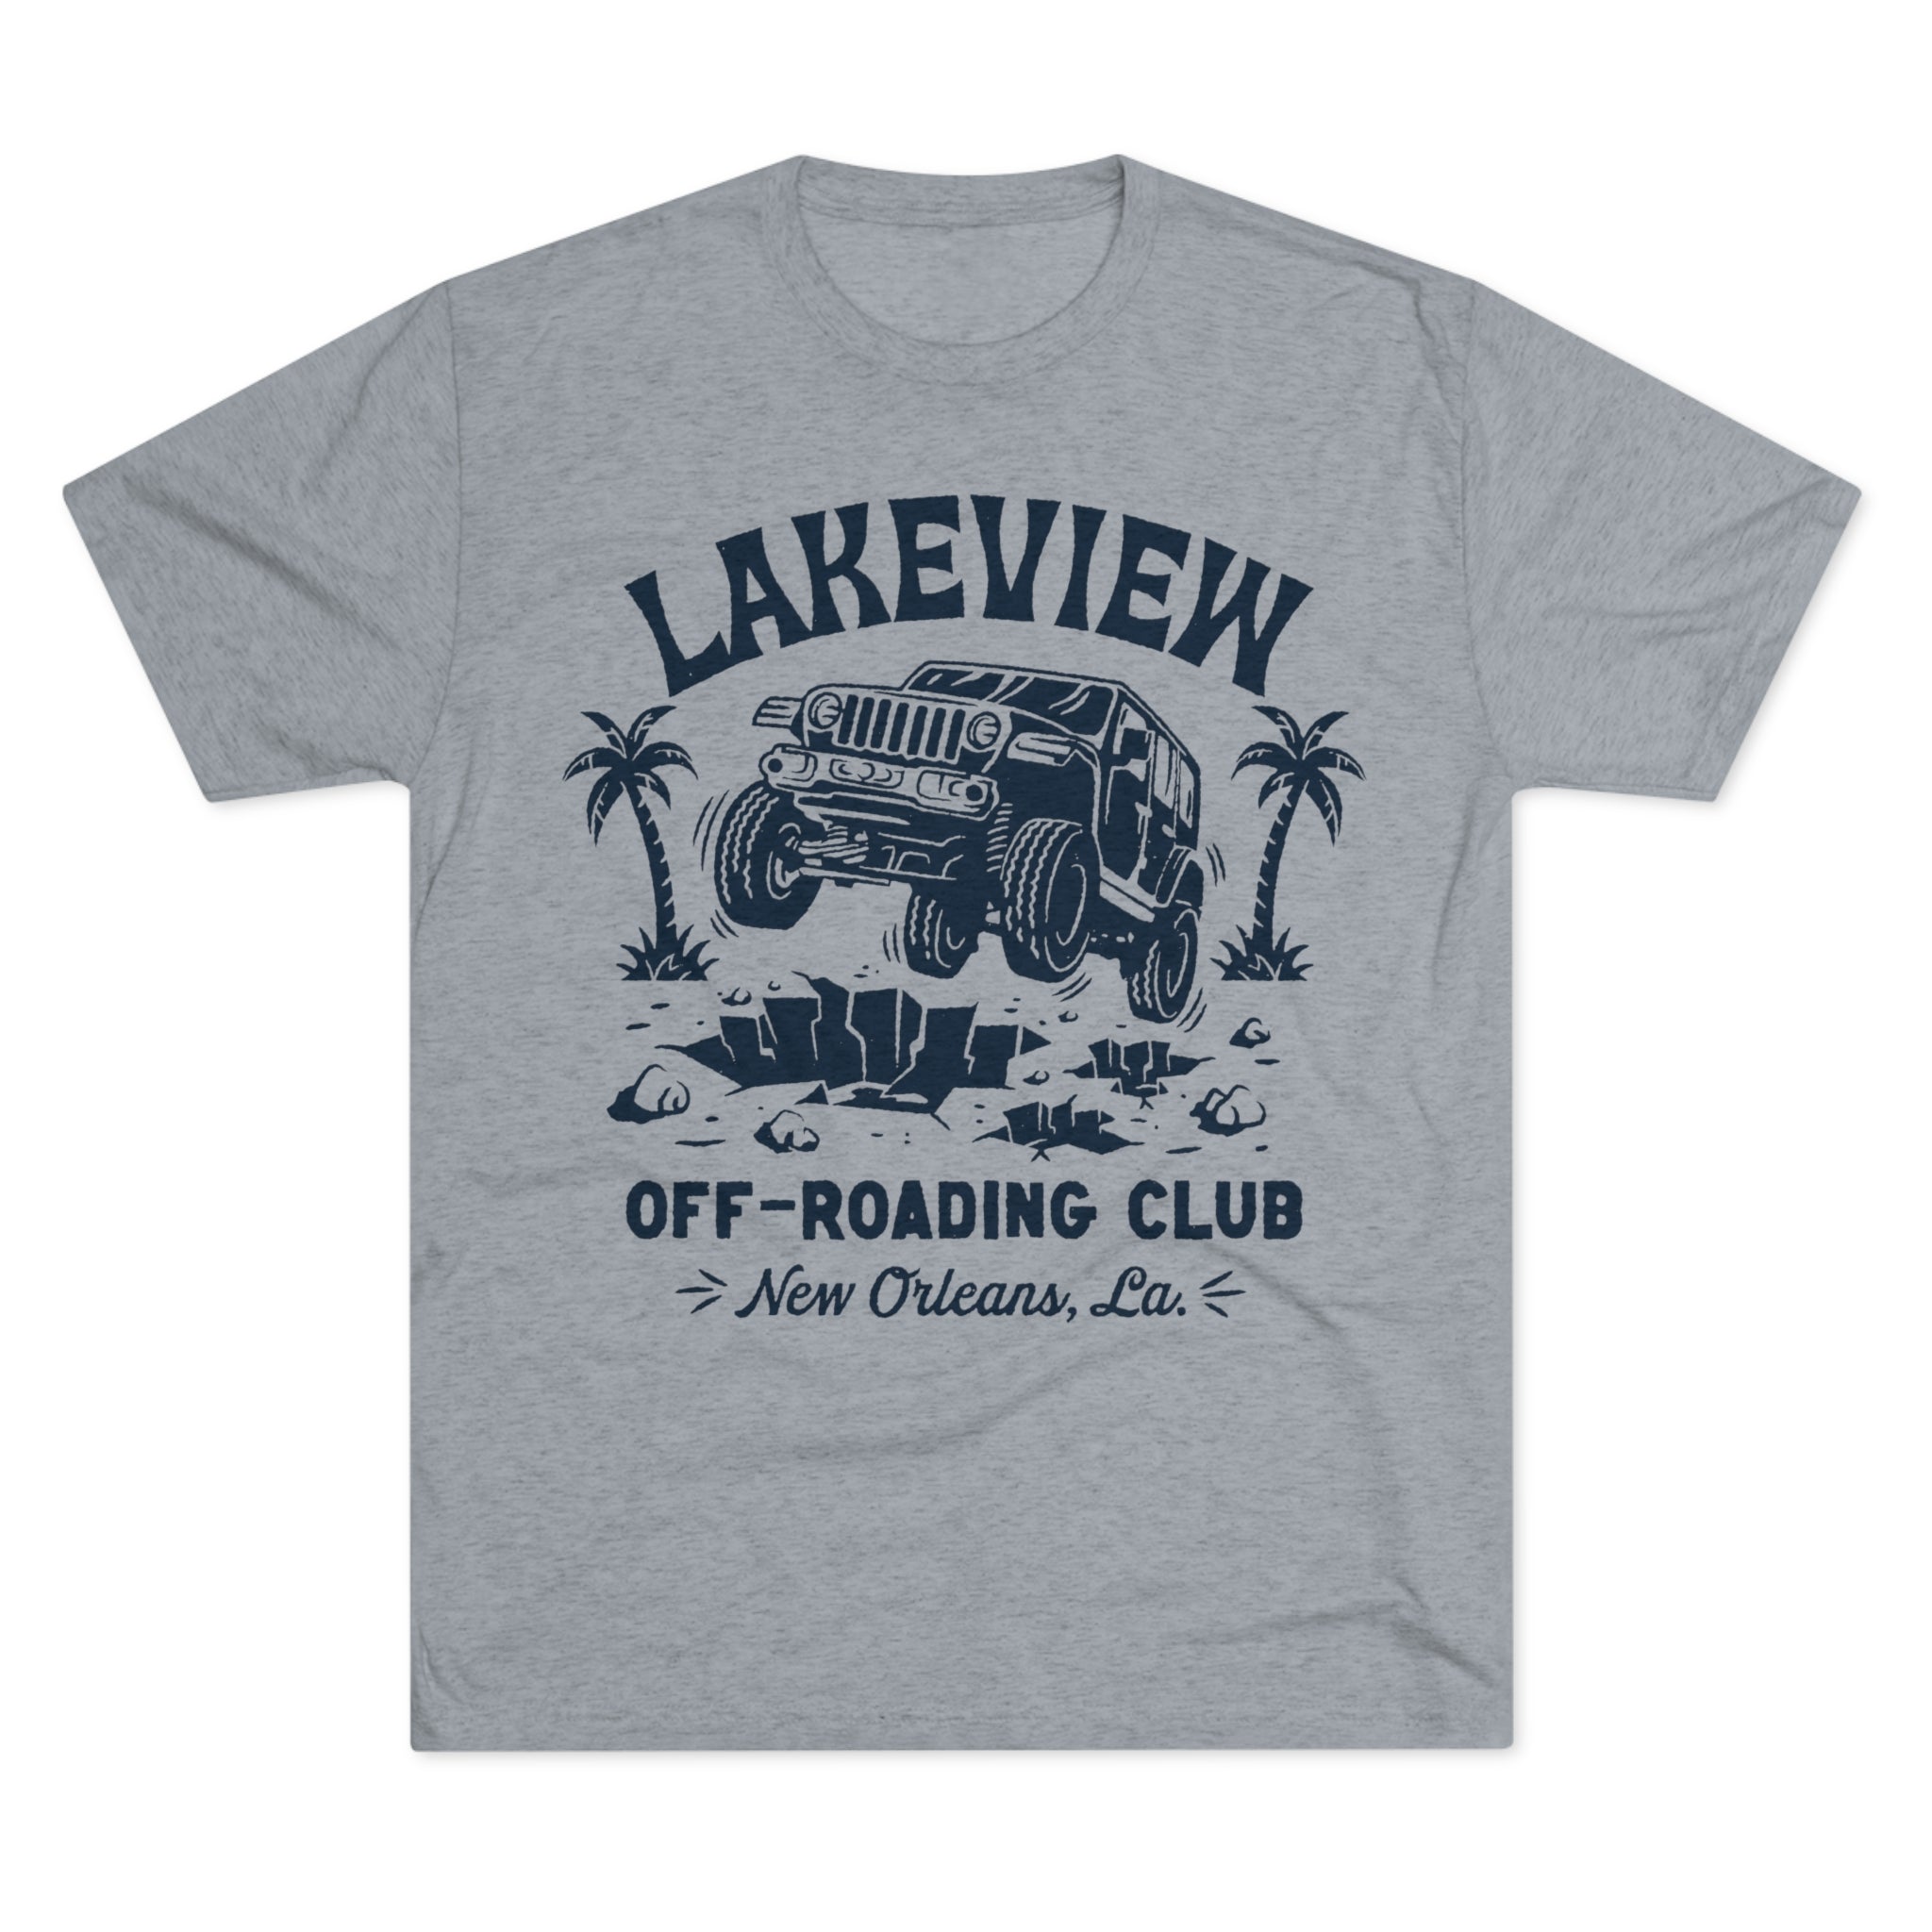 Lakeview Off-Roading Club - Dirty Coast Press